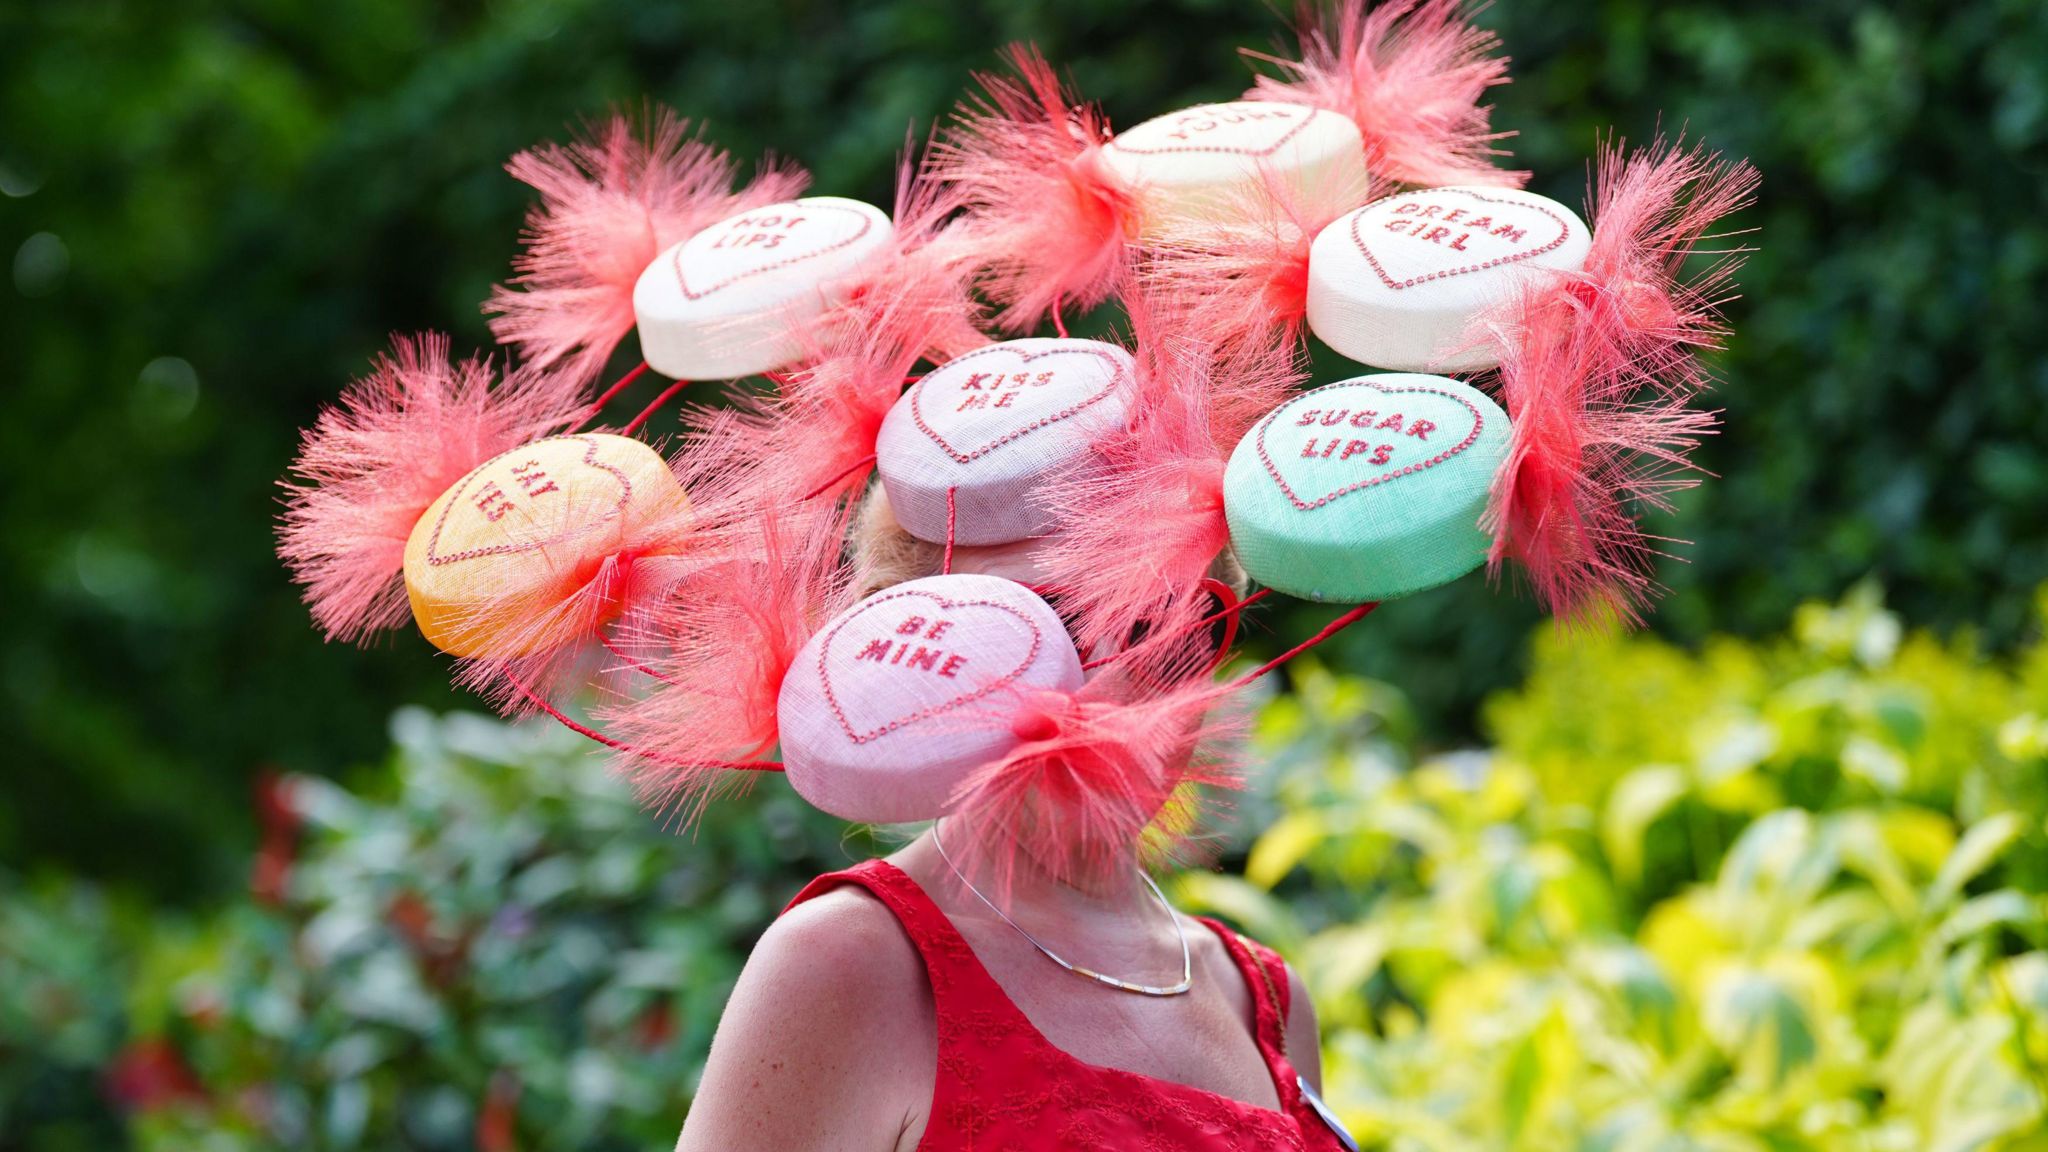 A woman wearing a hat, so large it obscures her face, with seven large attachments made to look like Love Heart Sweets